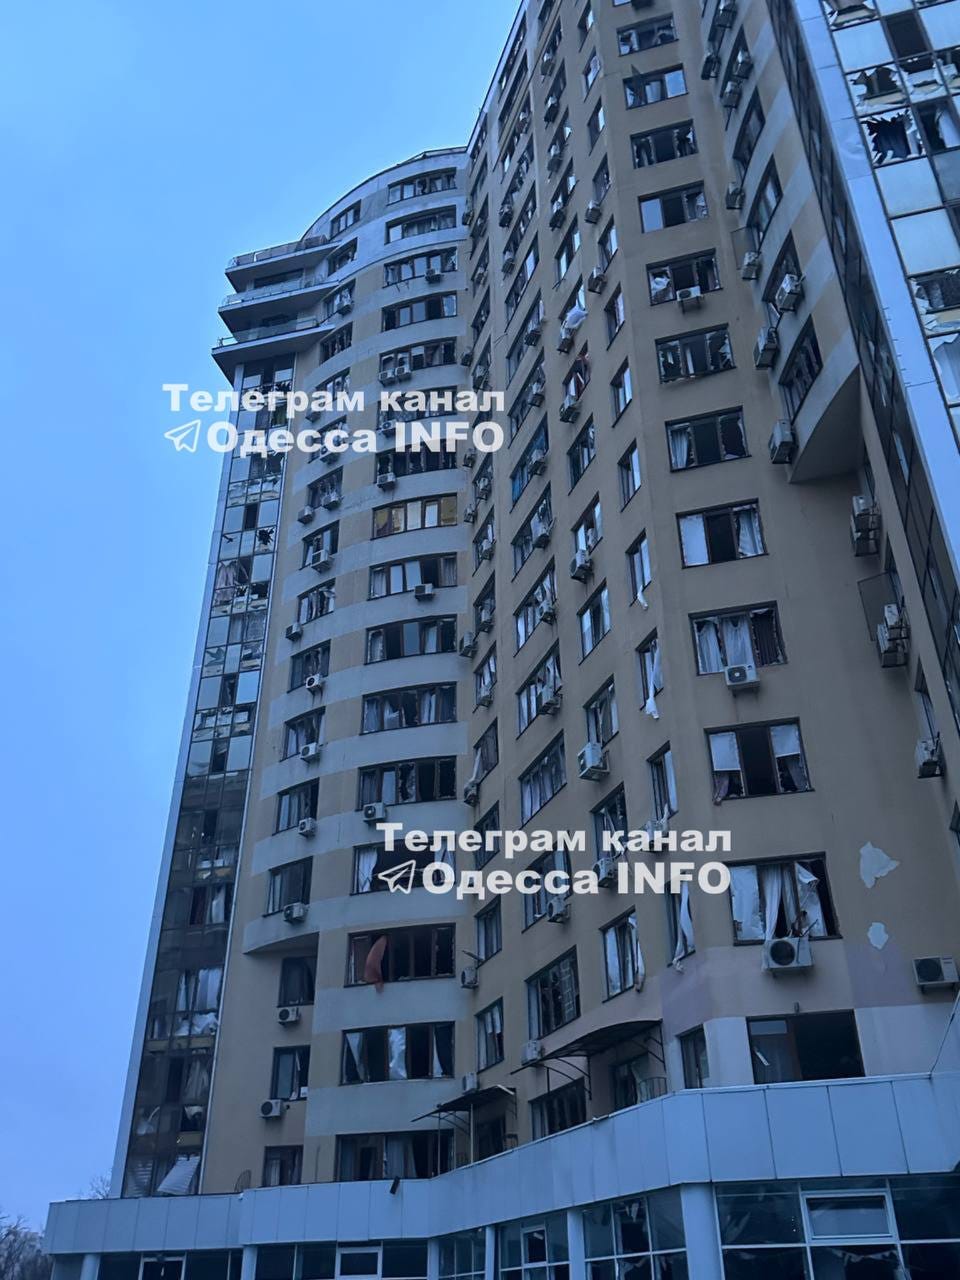 A civilian high rise apartment building with all of the windows blown out from the shockwave of a hypersonic missile launched by Russia.